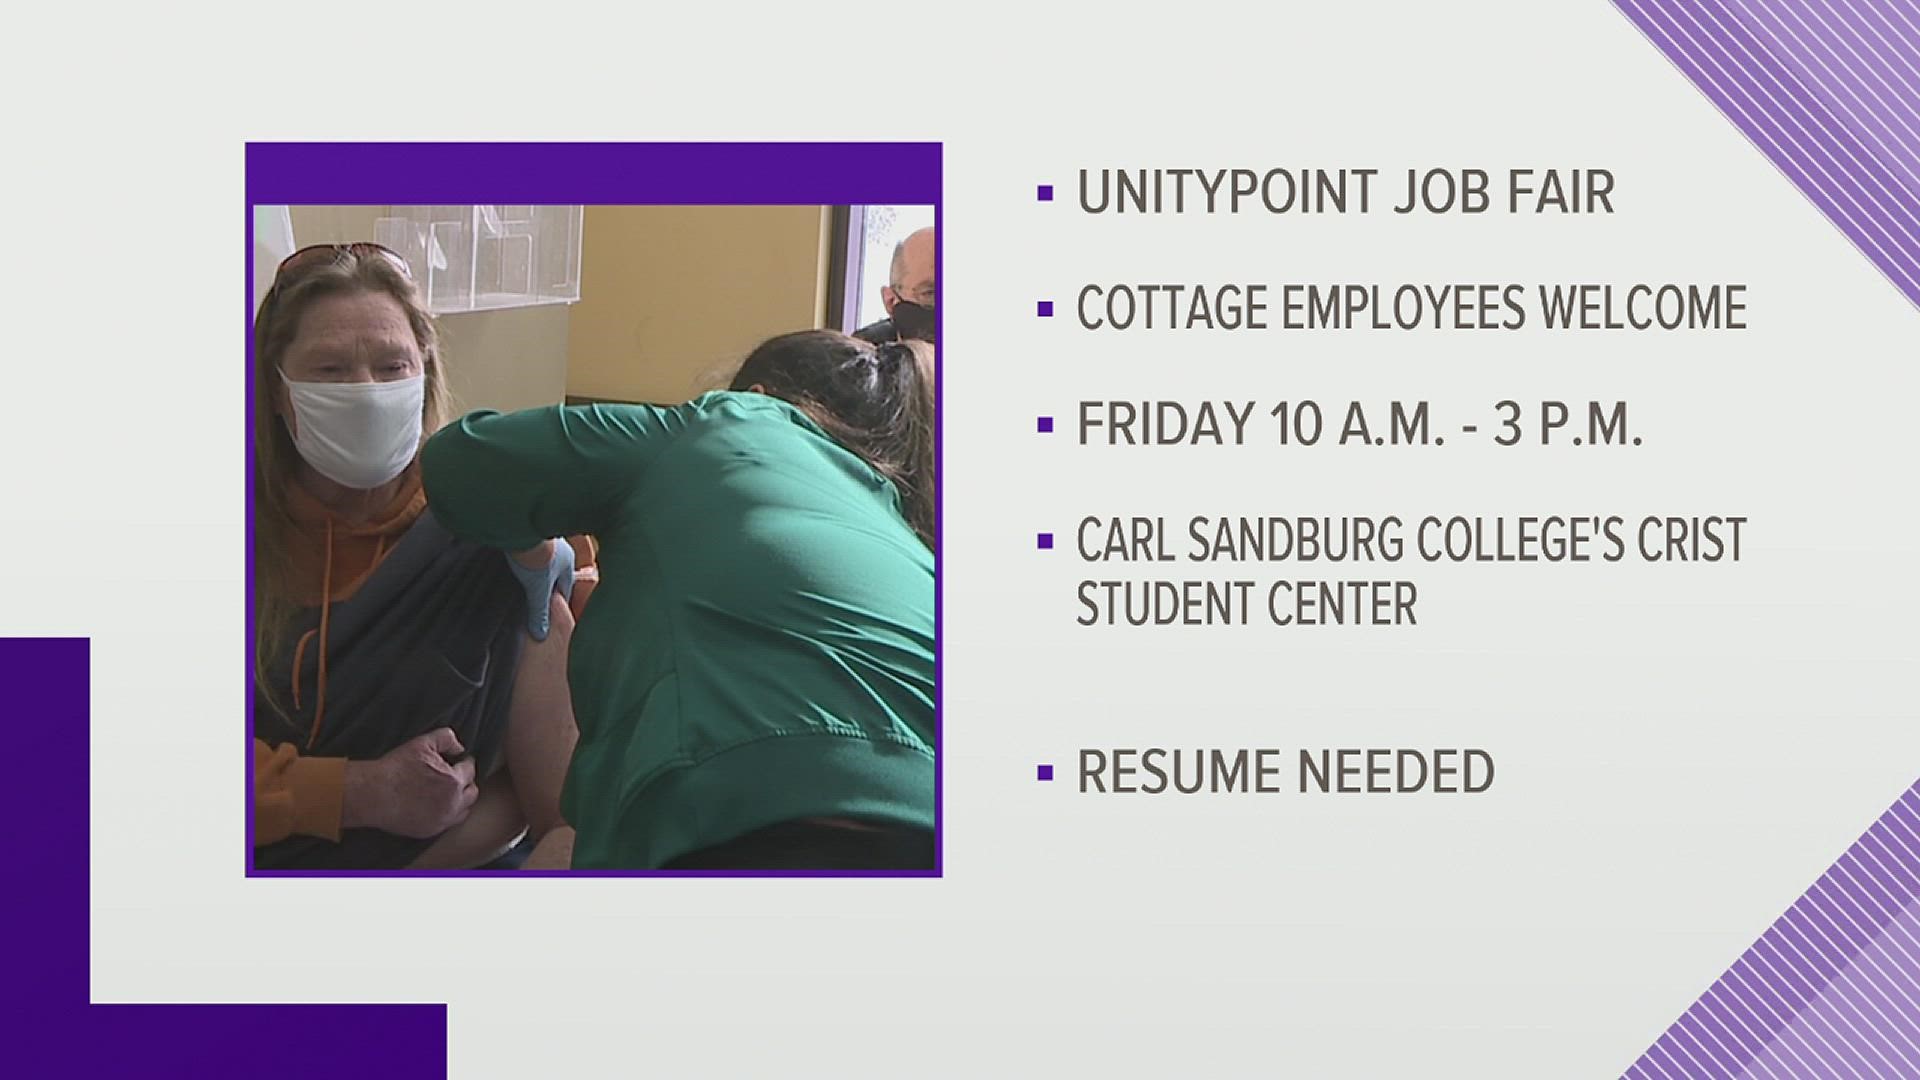 UnityPoint Health says its hospitals, home care and clinics are hiring in the Quad Cities and across Central Illinois.